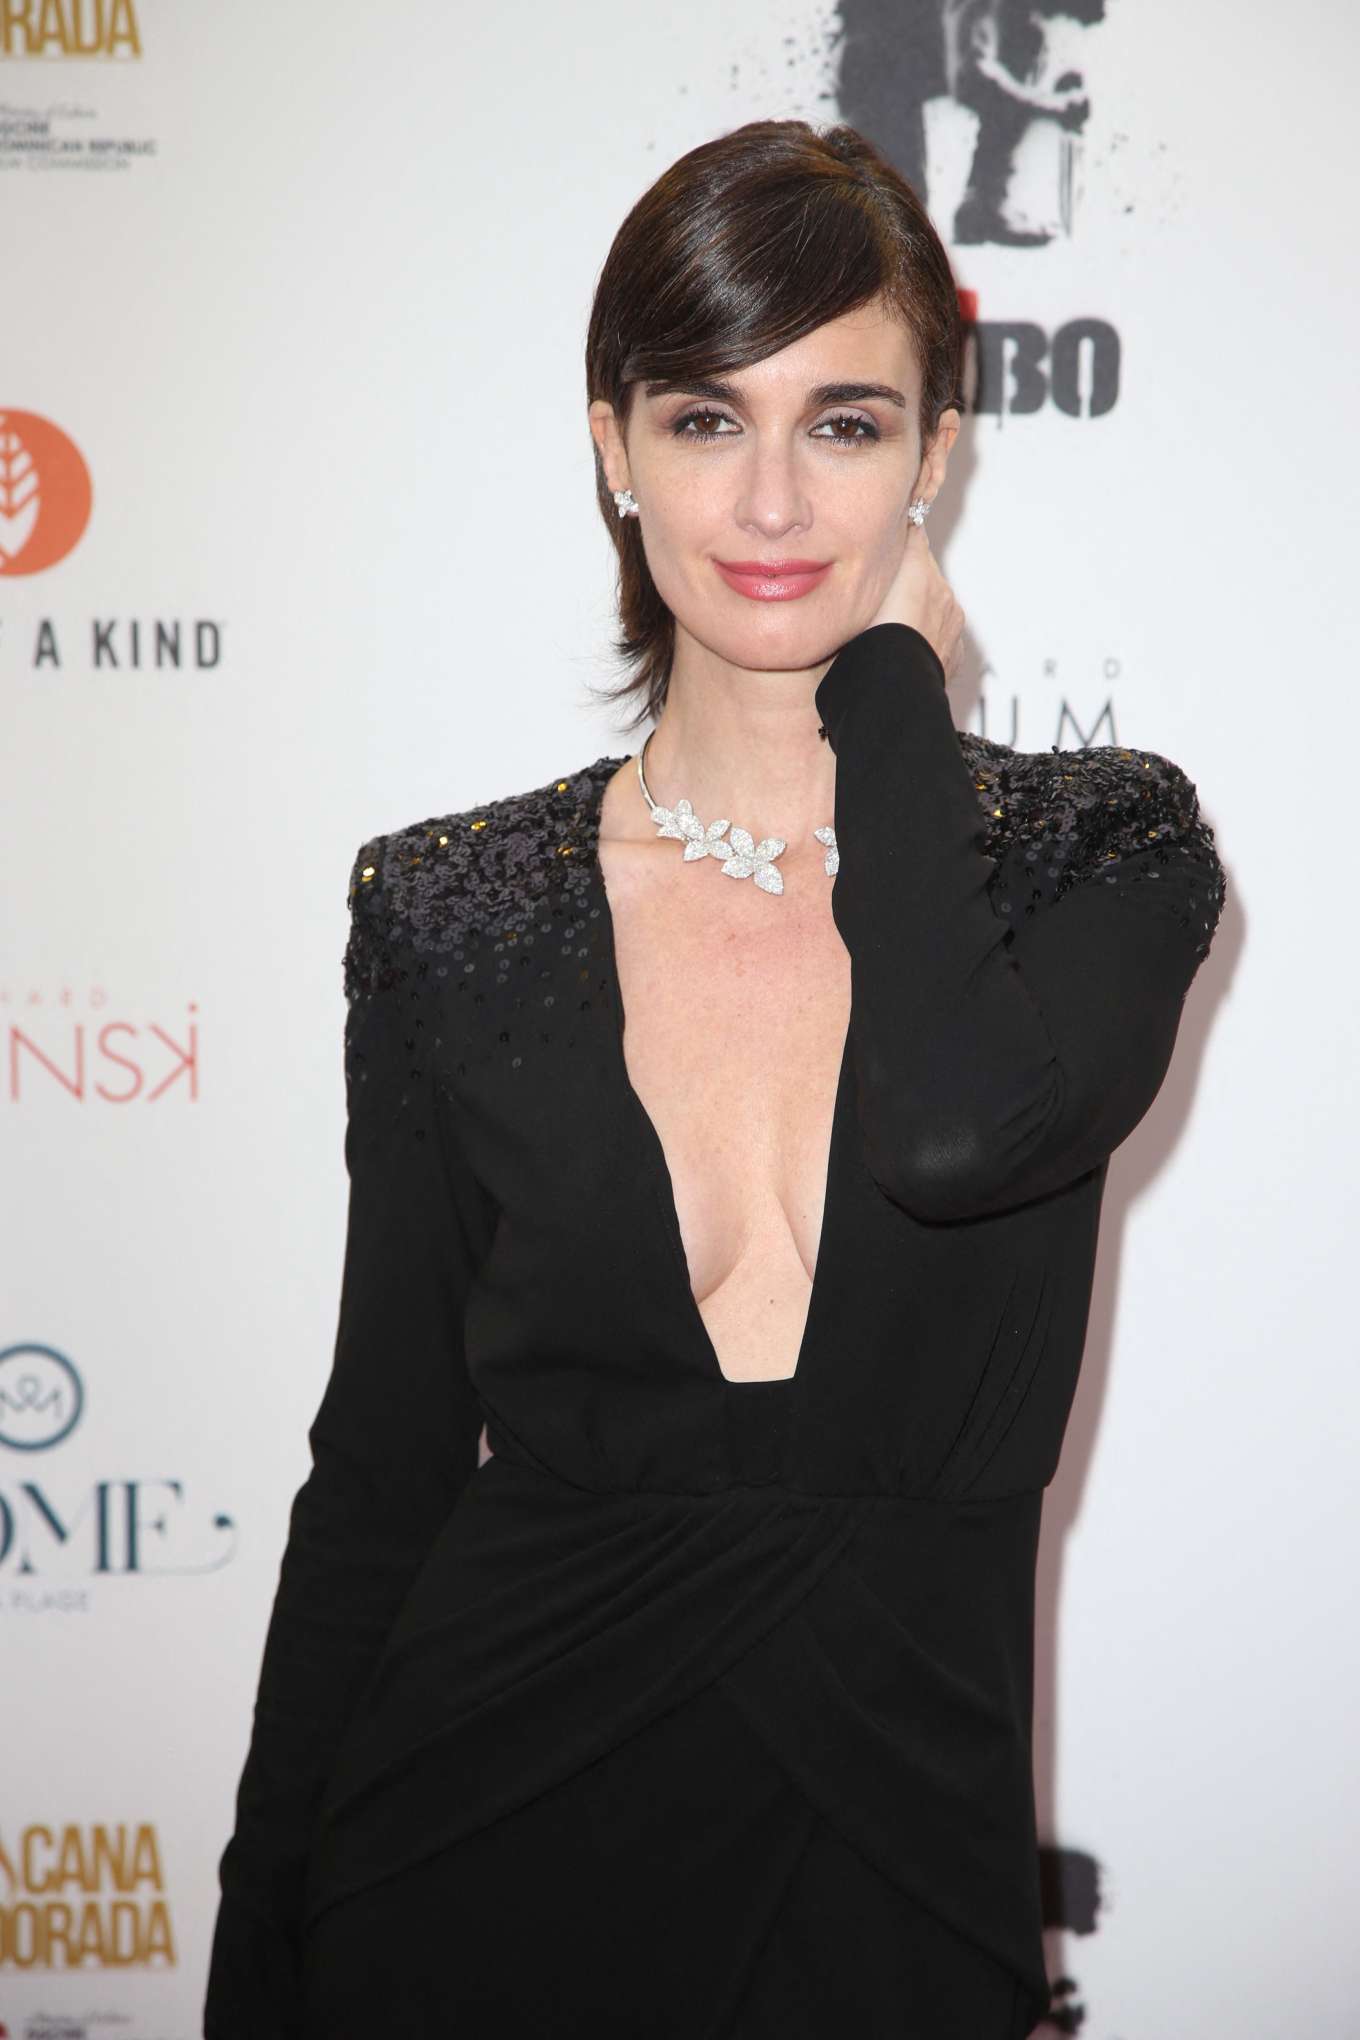 Paz Vega â€“ Millennium Media Dinner and Cocktail Reception in Honor Of Sylvester Stalloneas in Cannes